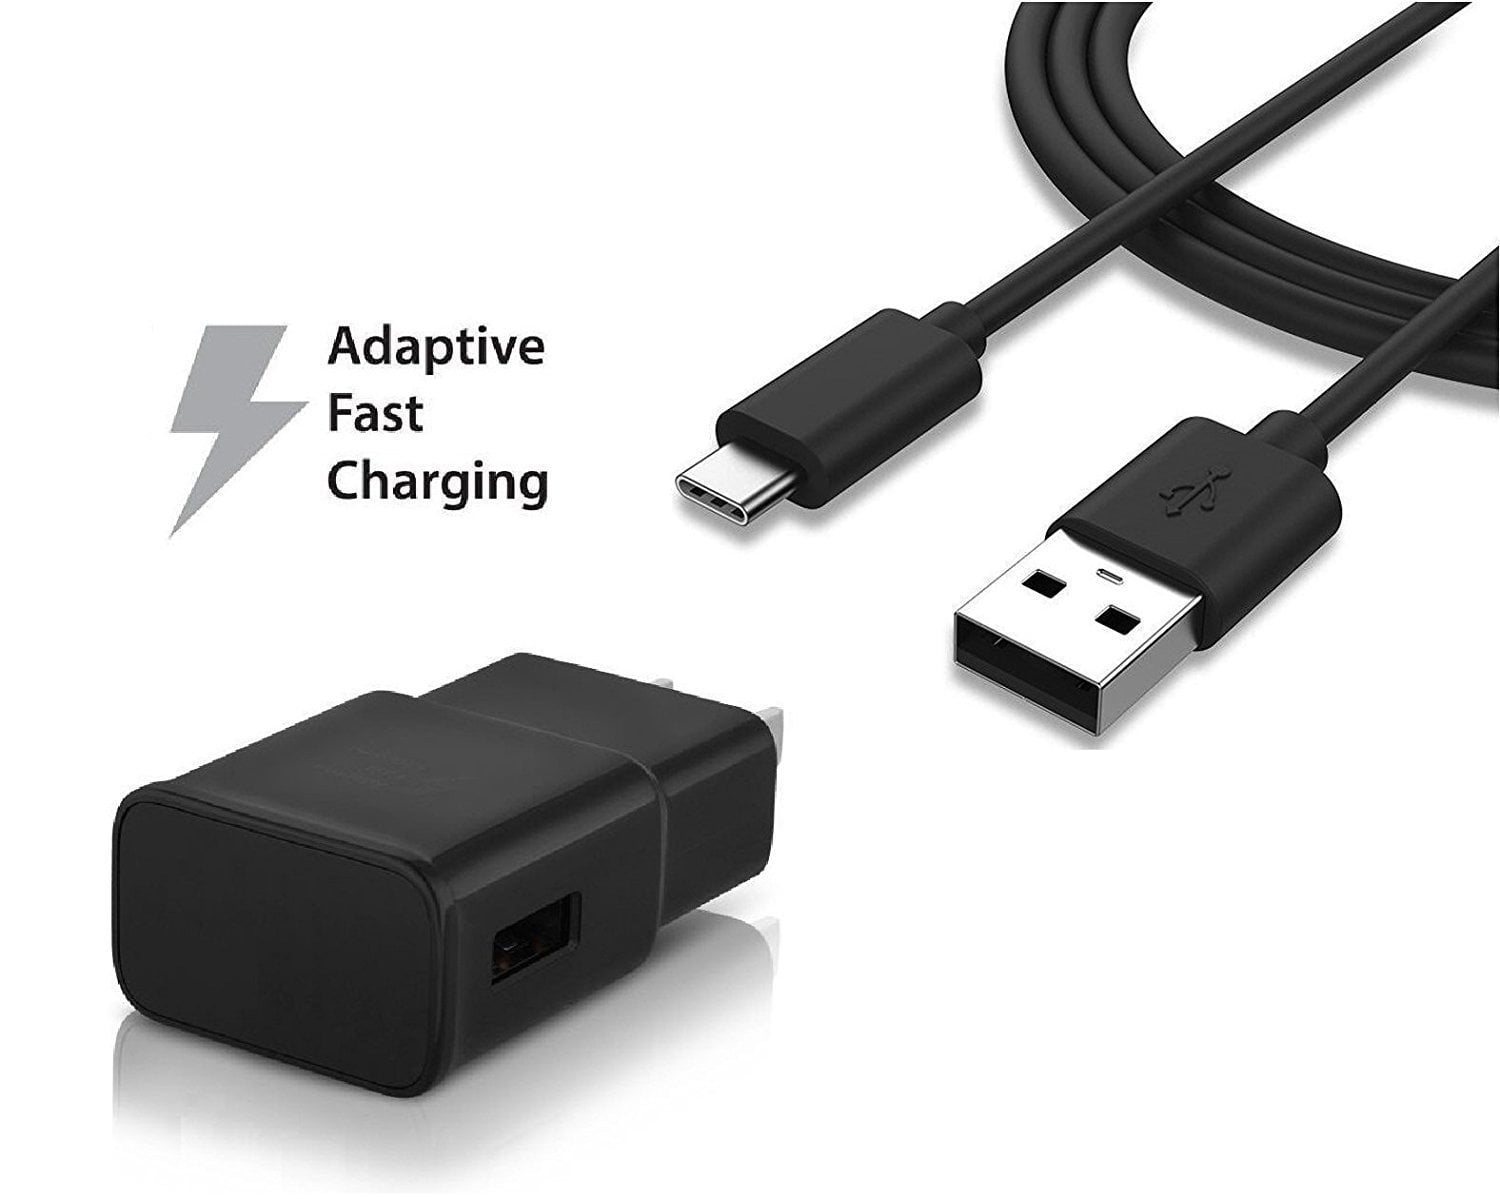 Car Charger + Wall Charger + 2 Type-C Cable Fast Charger up to 50/% Faster Charging! LG V30 Type-C 2.0 Cable Adaptive Fast Charger Kit by Ixir